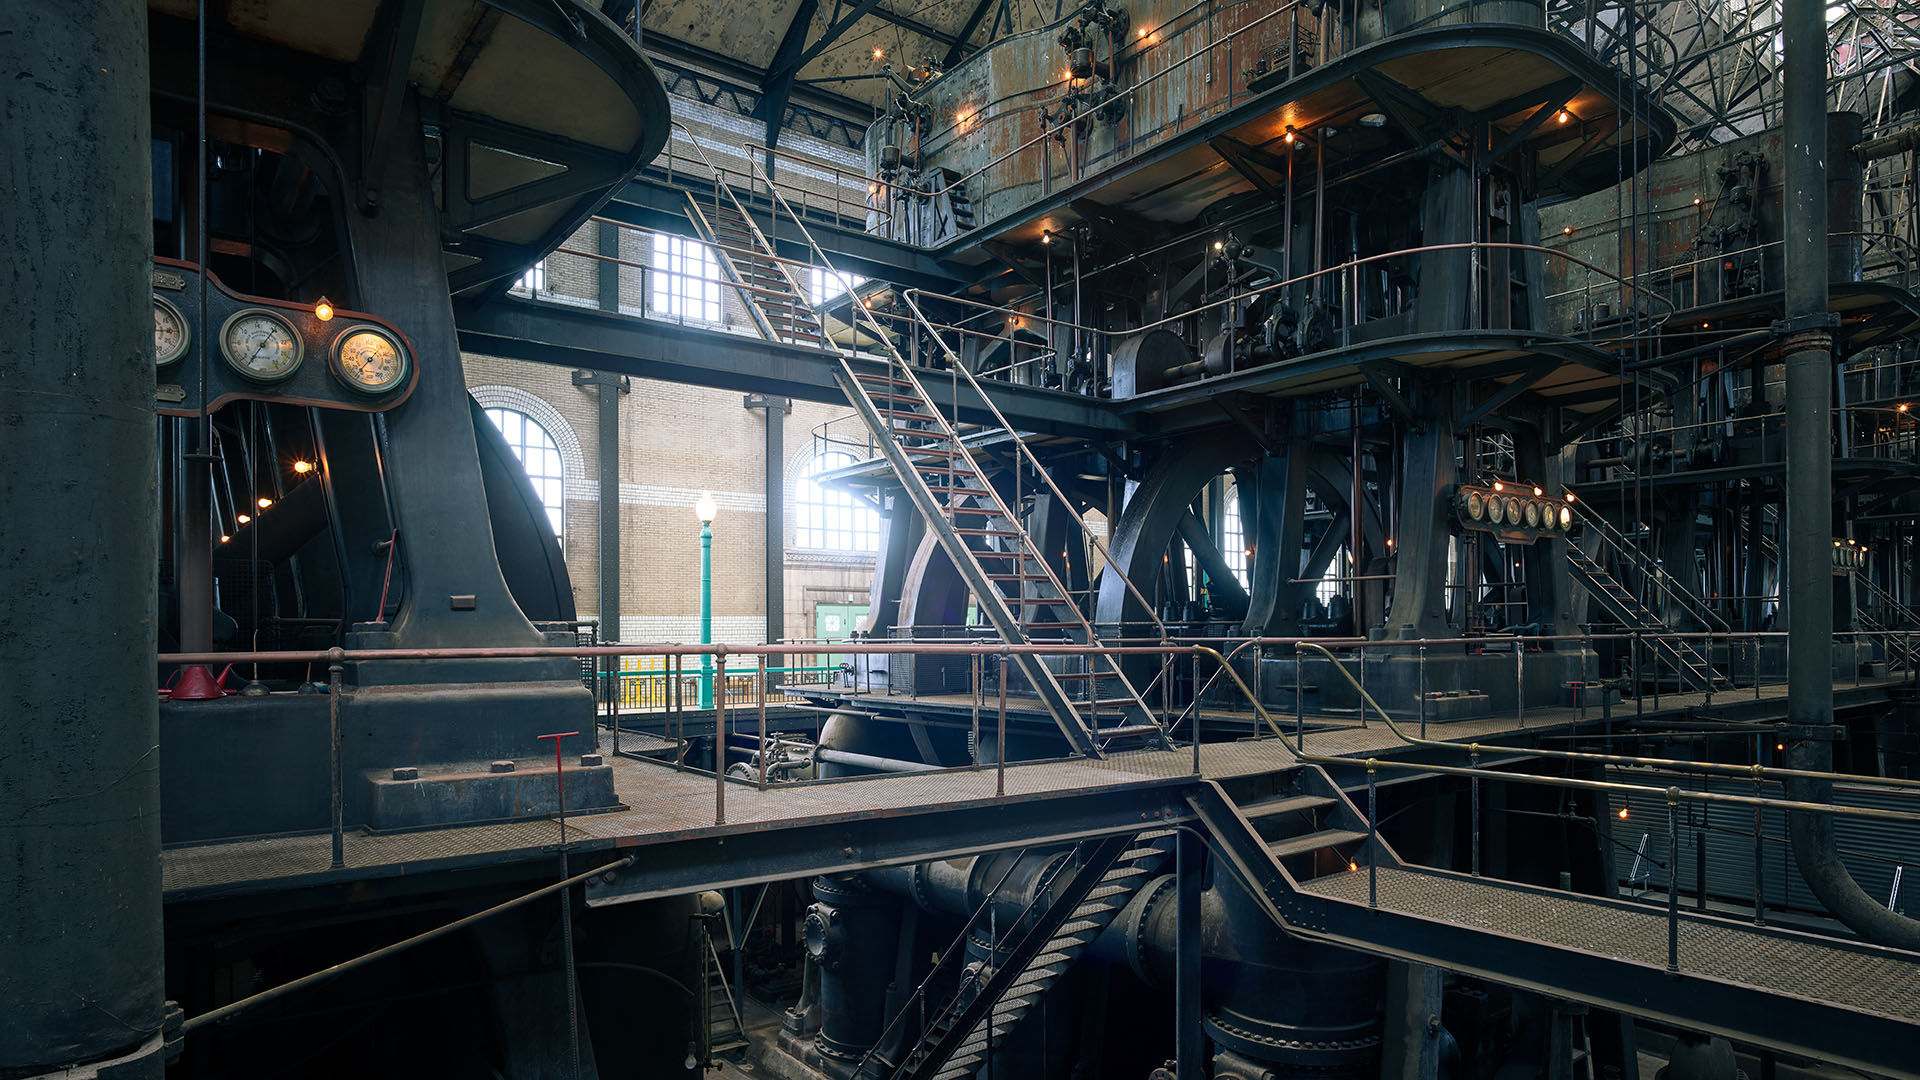 Staircase connecting factory levels